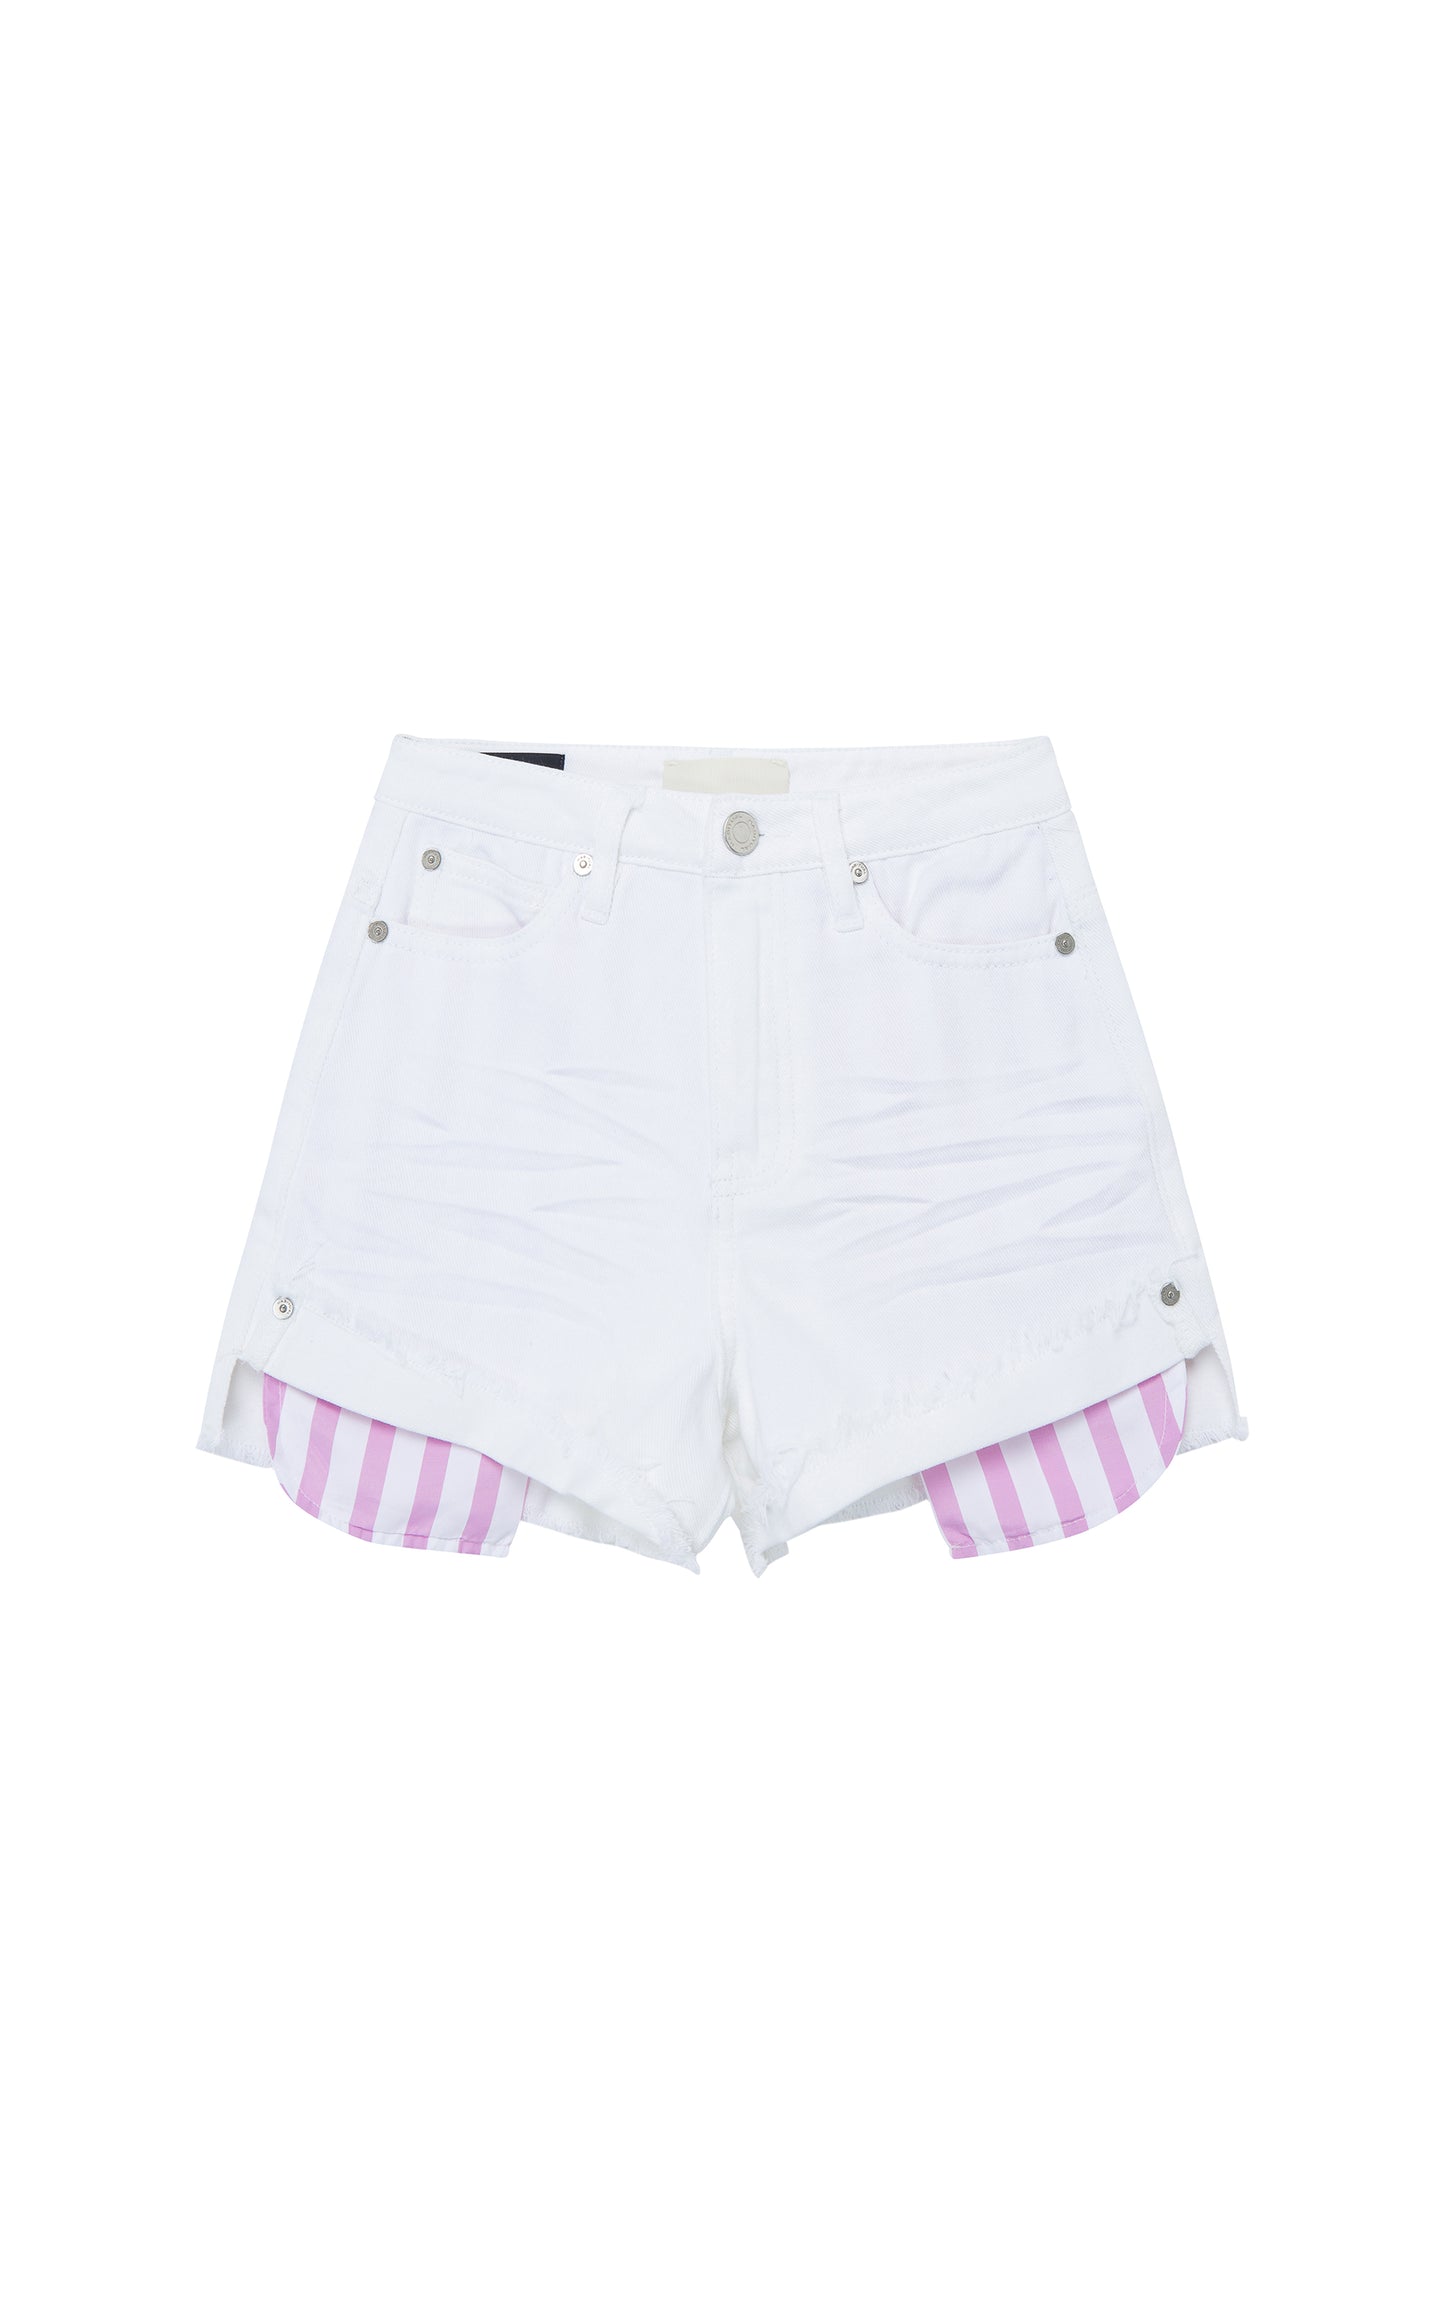 White denim shorts with pink-and-white striped exposed pockets